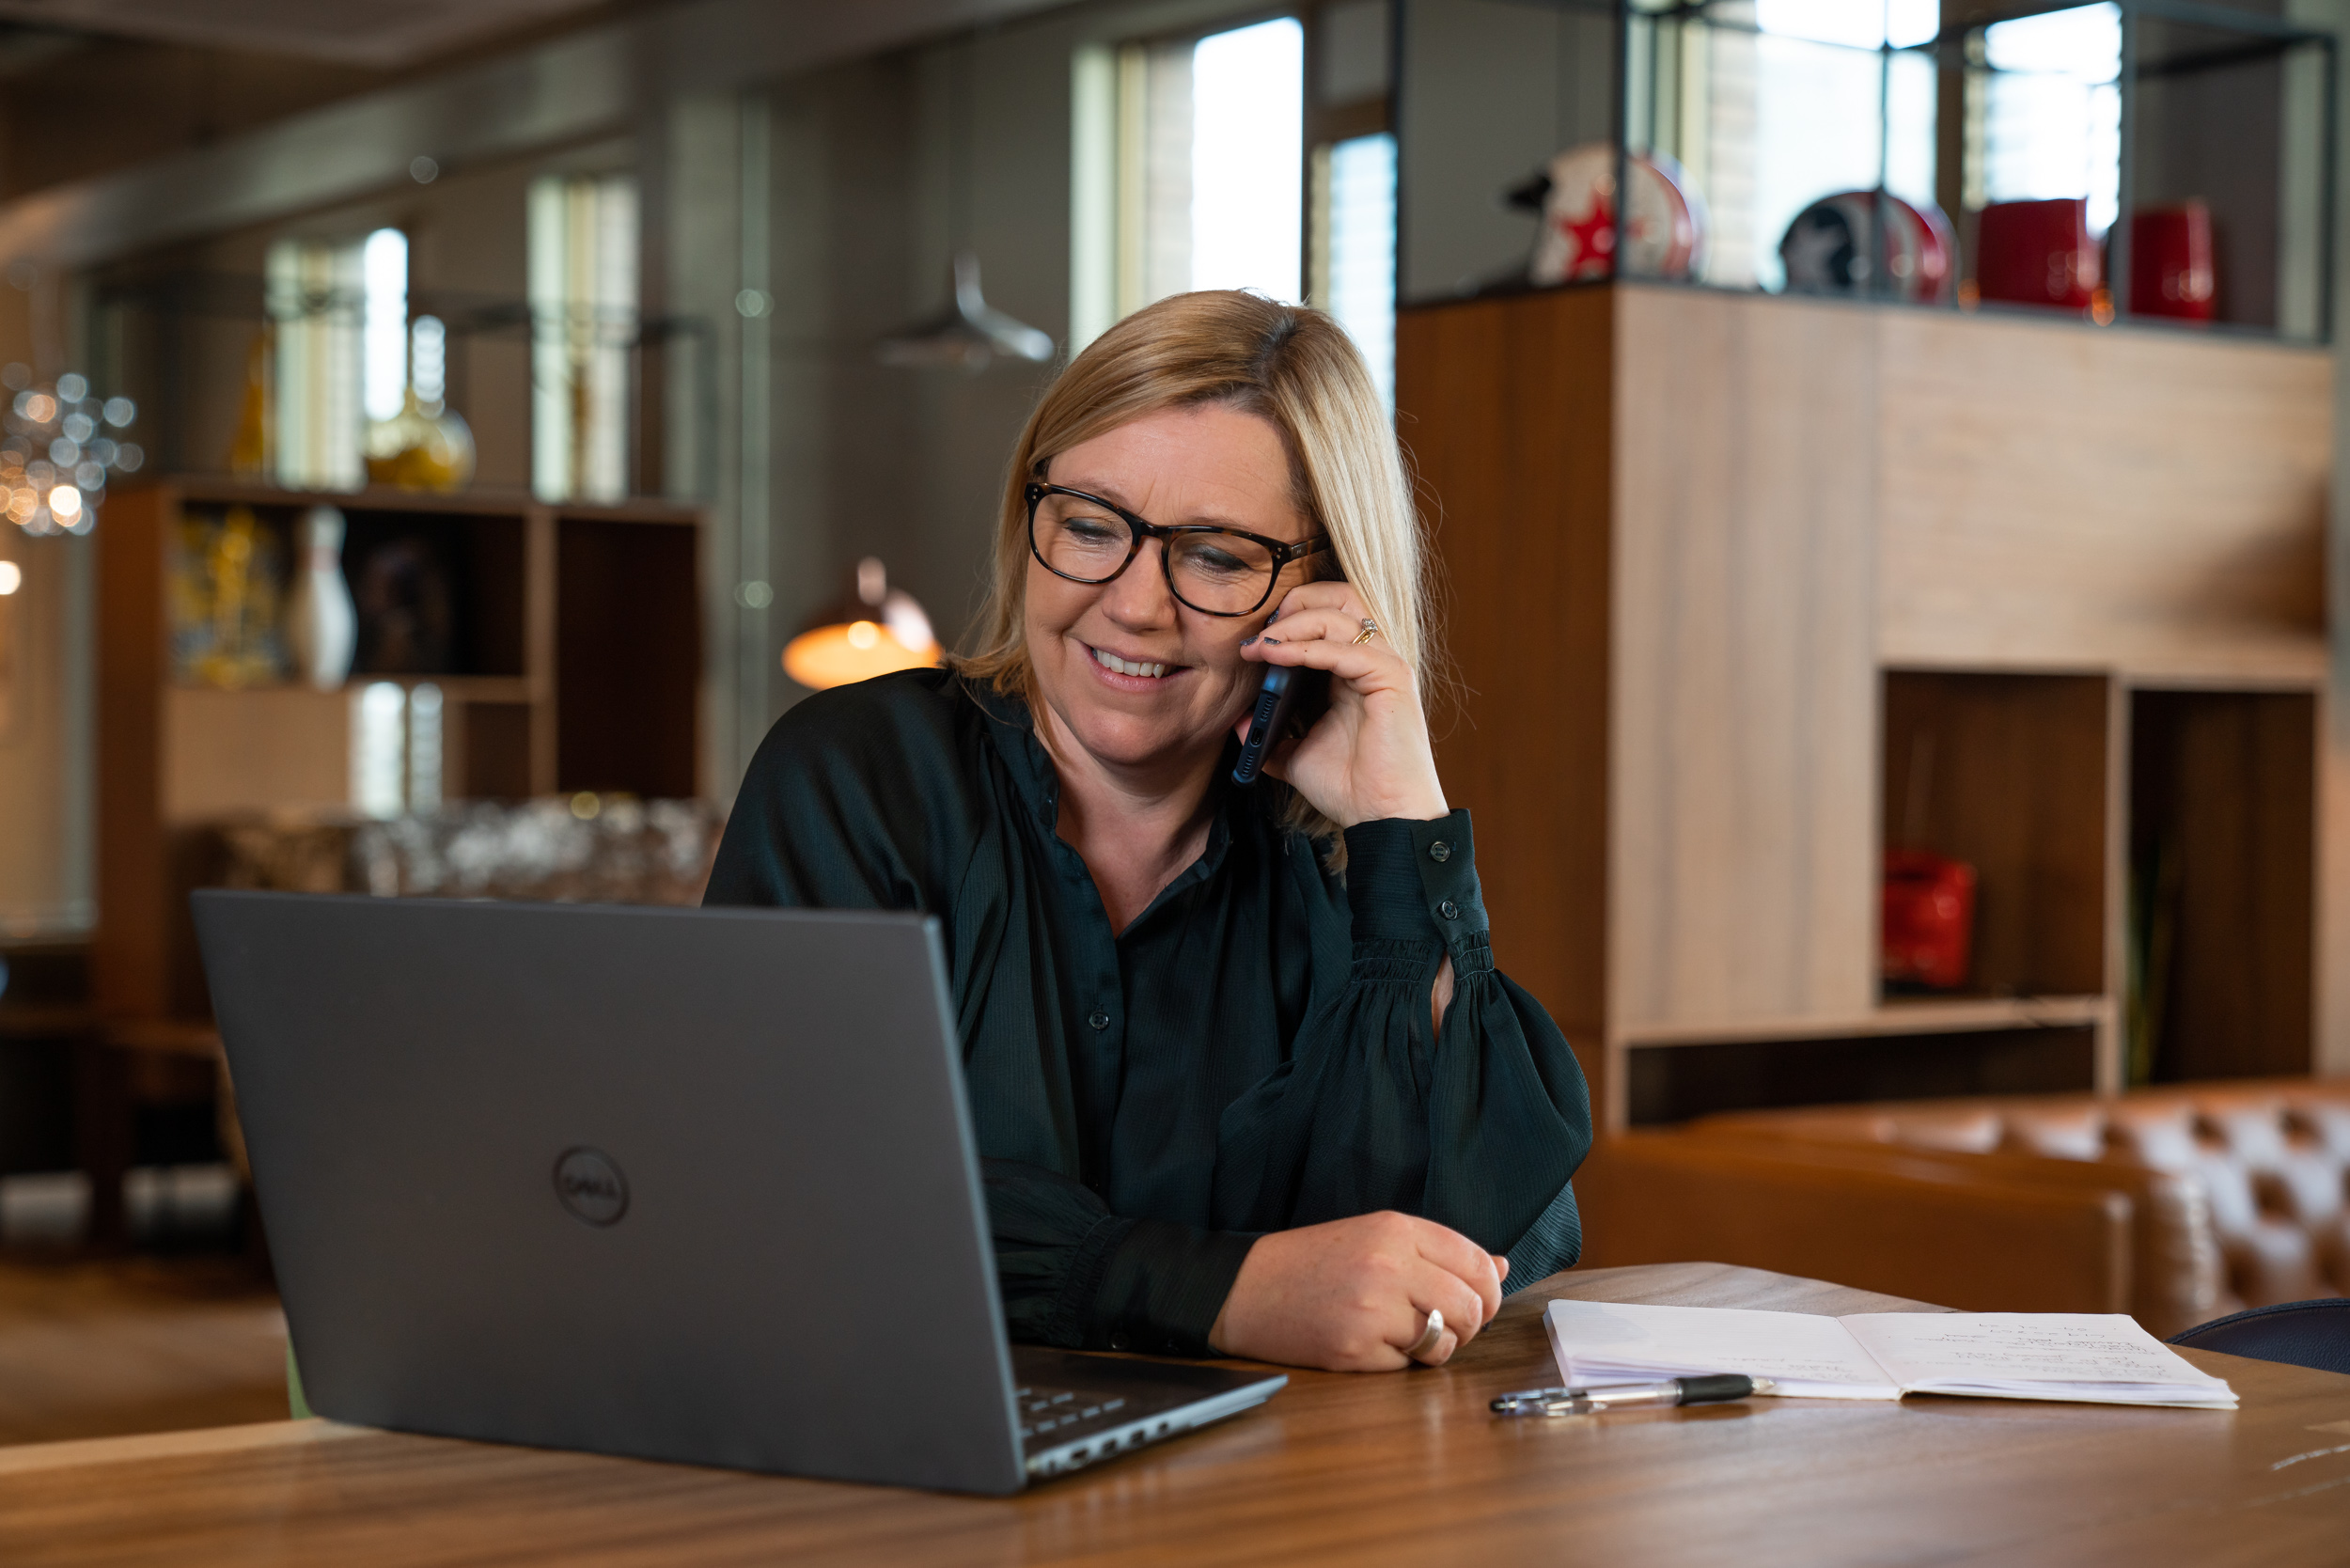 middle aged woman with glassers, on phone, using laptop, working, portrait, business portrait